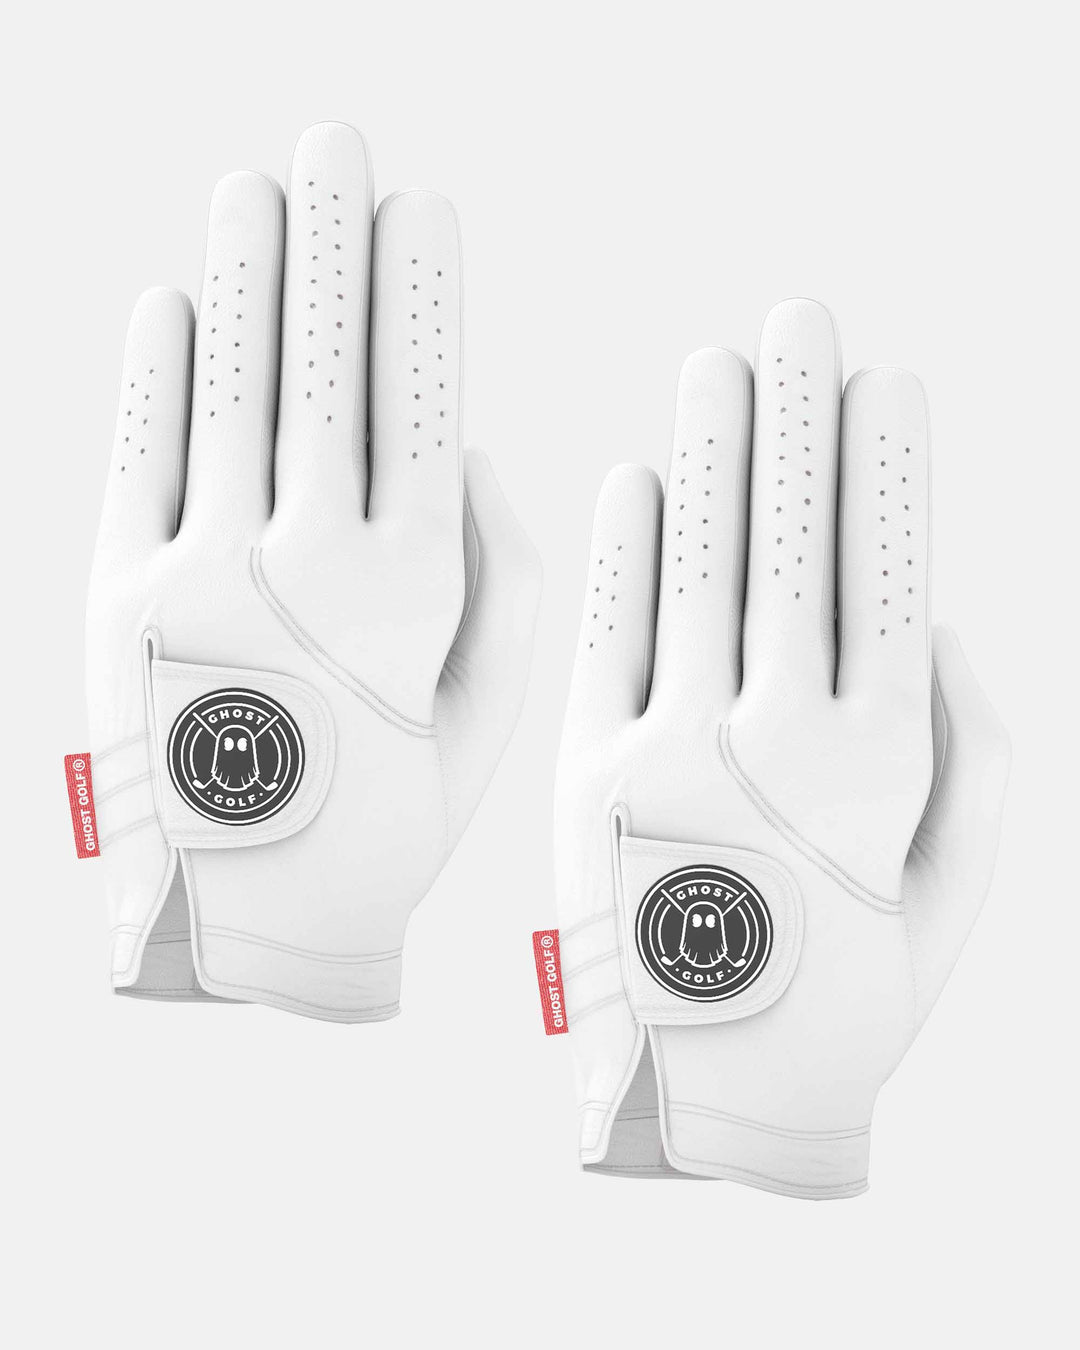 Ghost Golf AAA Cabretta Golf Glove 2 pack Color White